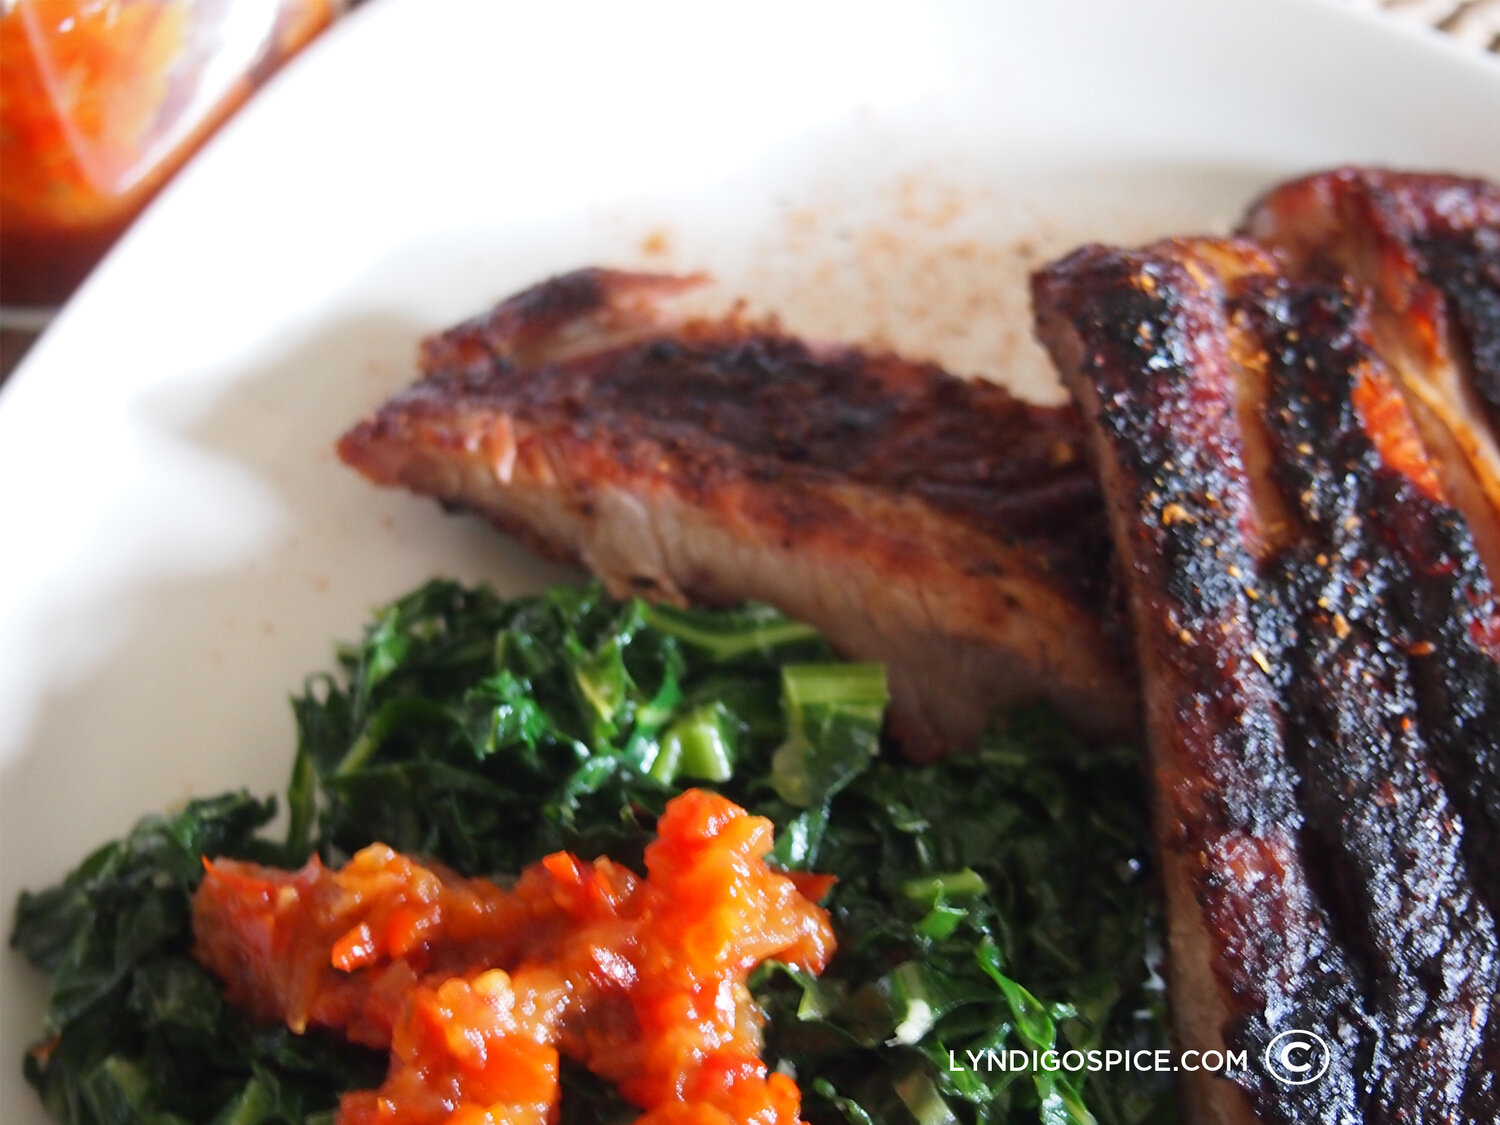 Original Spice Rub seasoned Ribs &amp; Spicy Red Pepper Relish on Couve